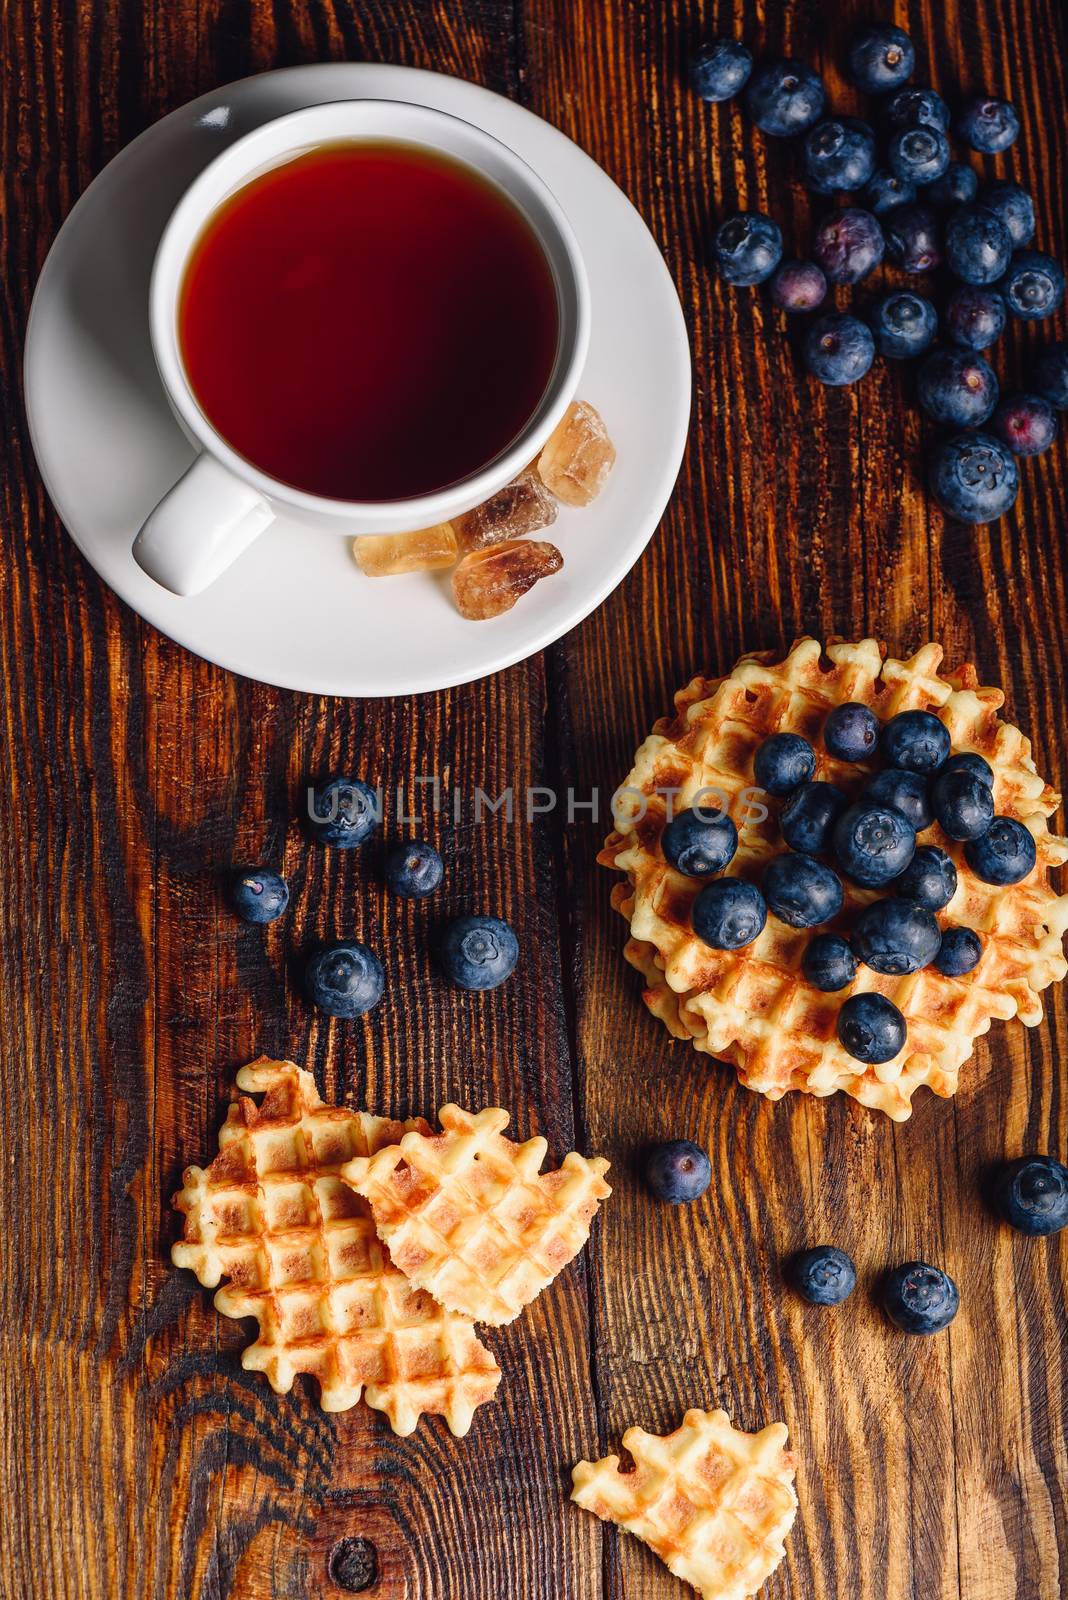 White Cup of Tea with Blueberries and Whole and Broken Belgian Waffles on Wooden Background. Vertical Orientation.